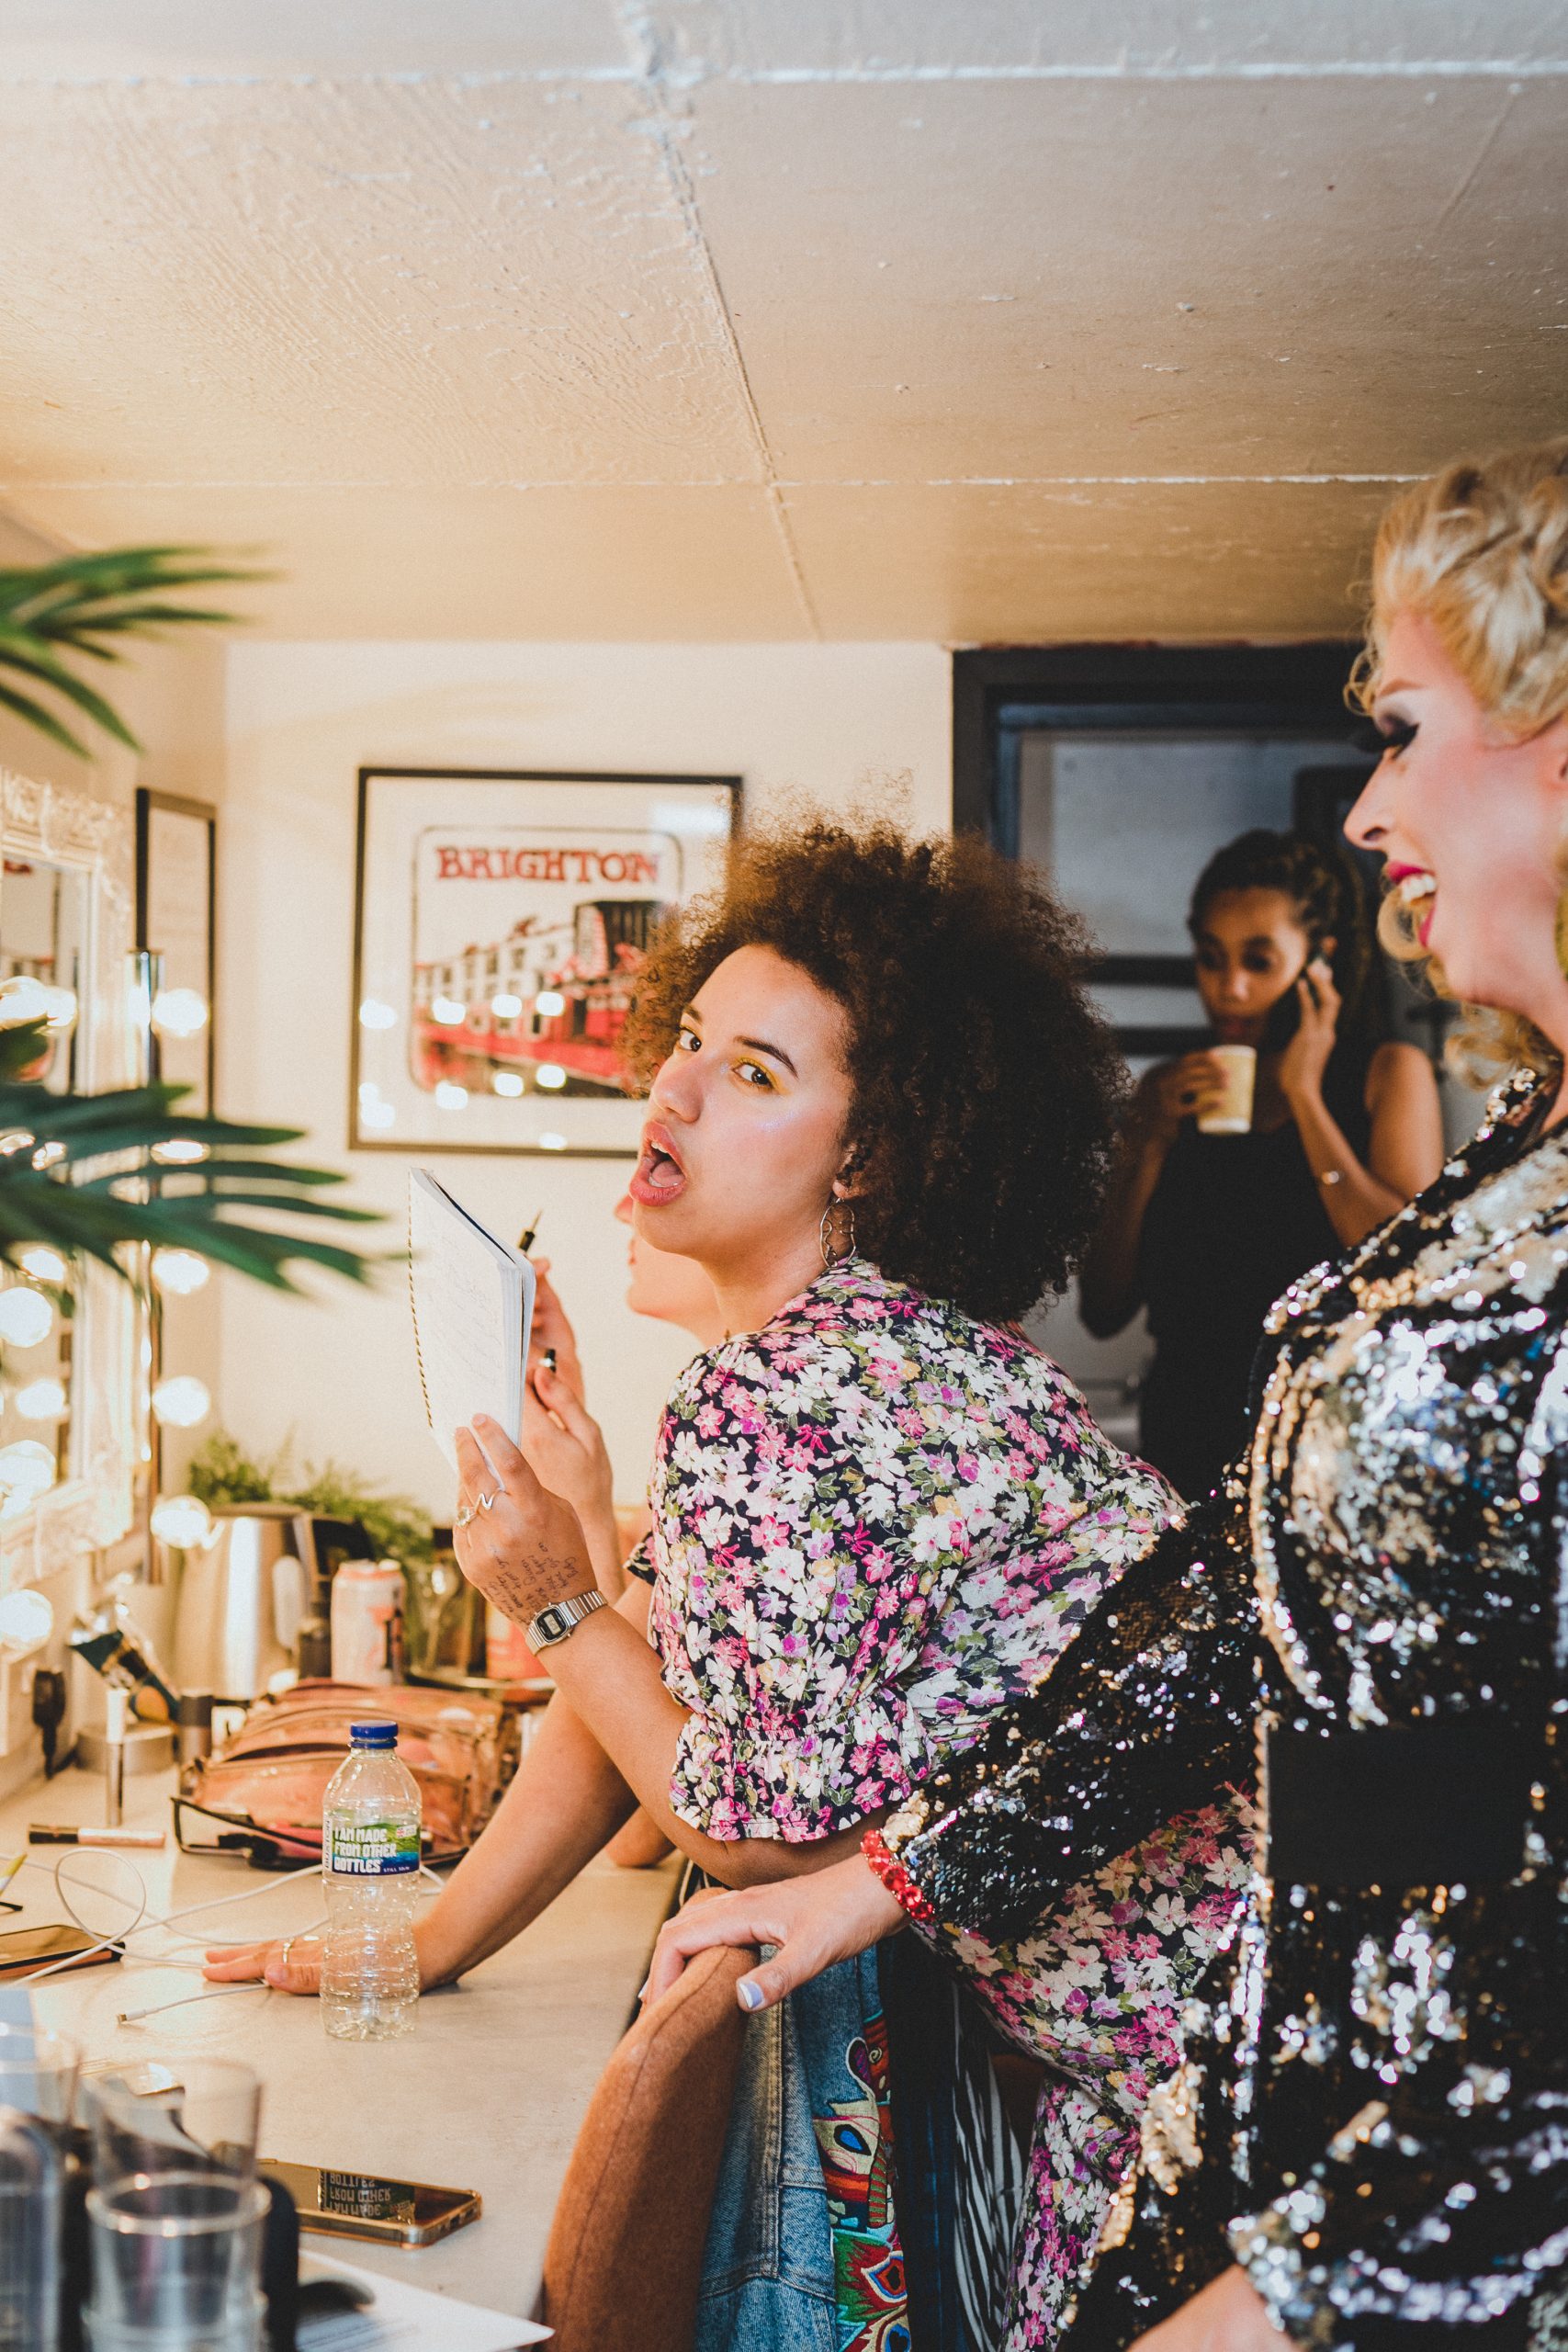 Emily Bampton, back stage posing at the camera, she has curly afro hair and wears a floral maxi dress. Ophelia Payne is stands next to Emily, smiling towards her. Kate Cheka, is stood in the background holding a cup and talking on the phone